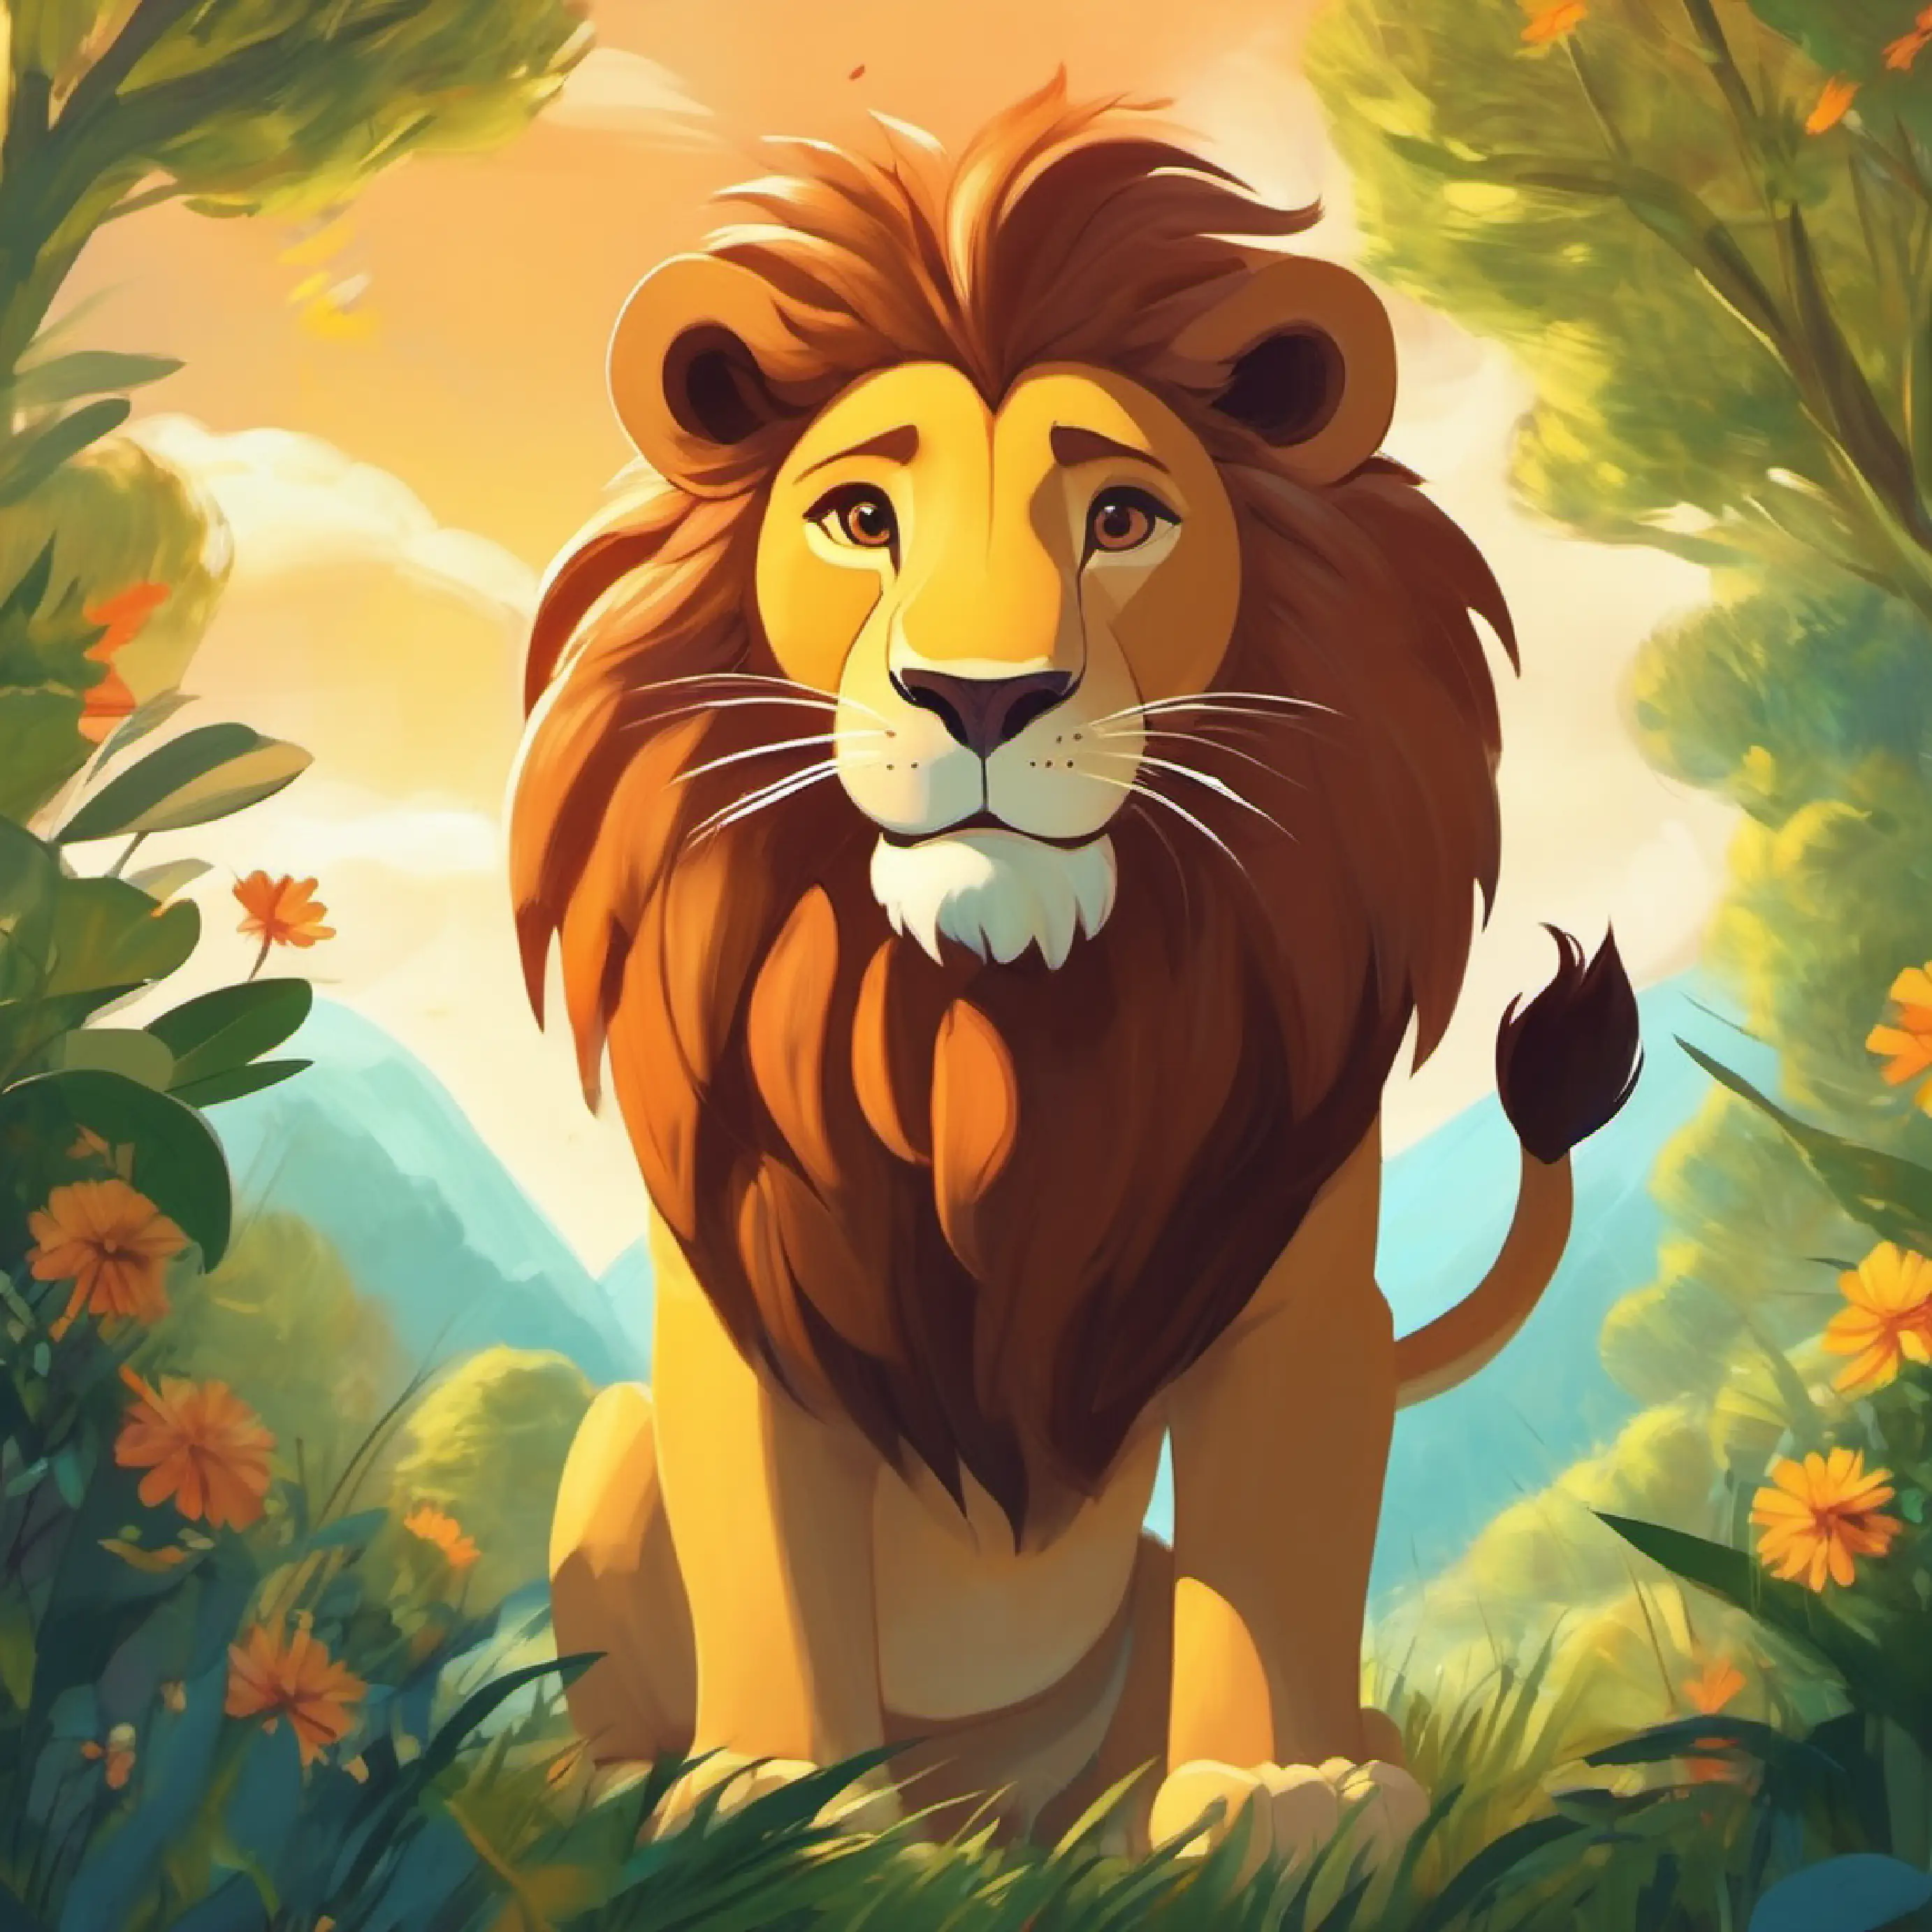 Lion experiences happiness from positive interactions.